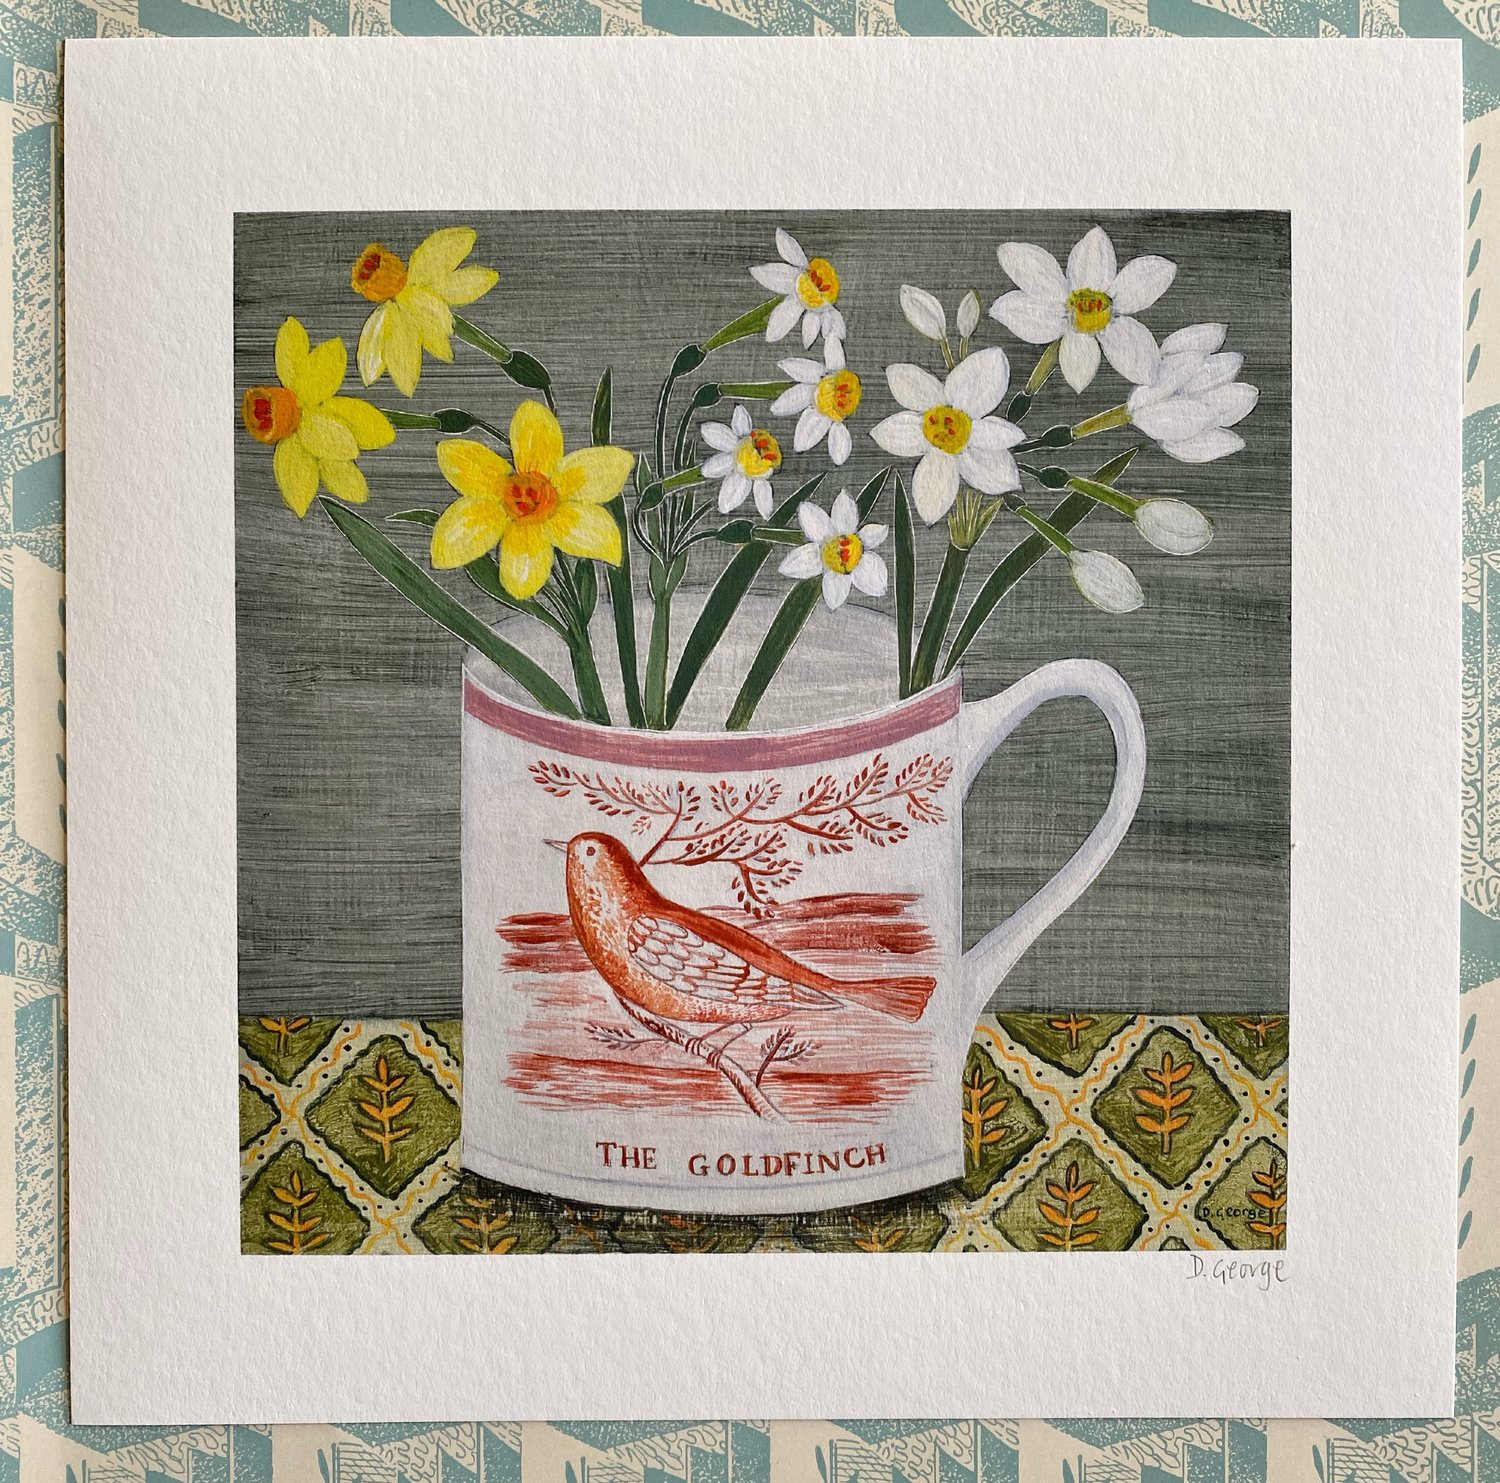 Image of The Goldfinch cup print